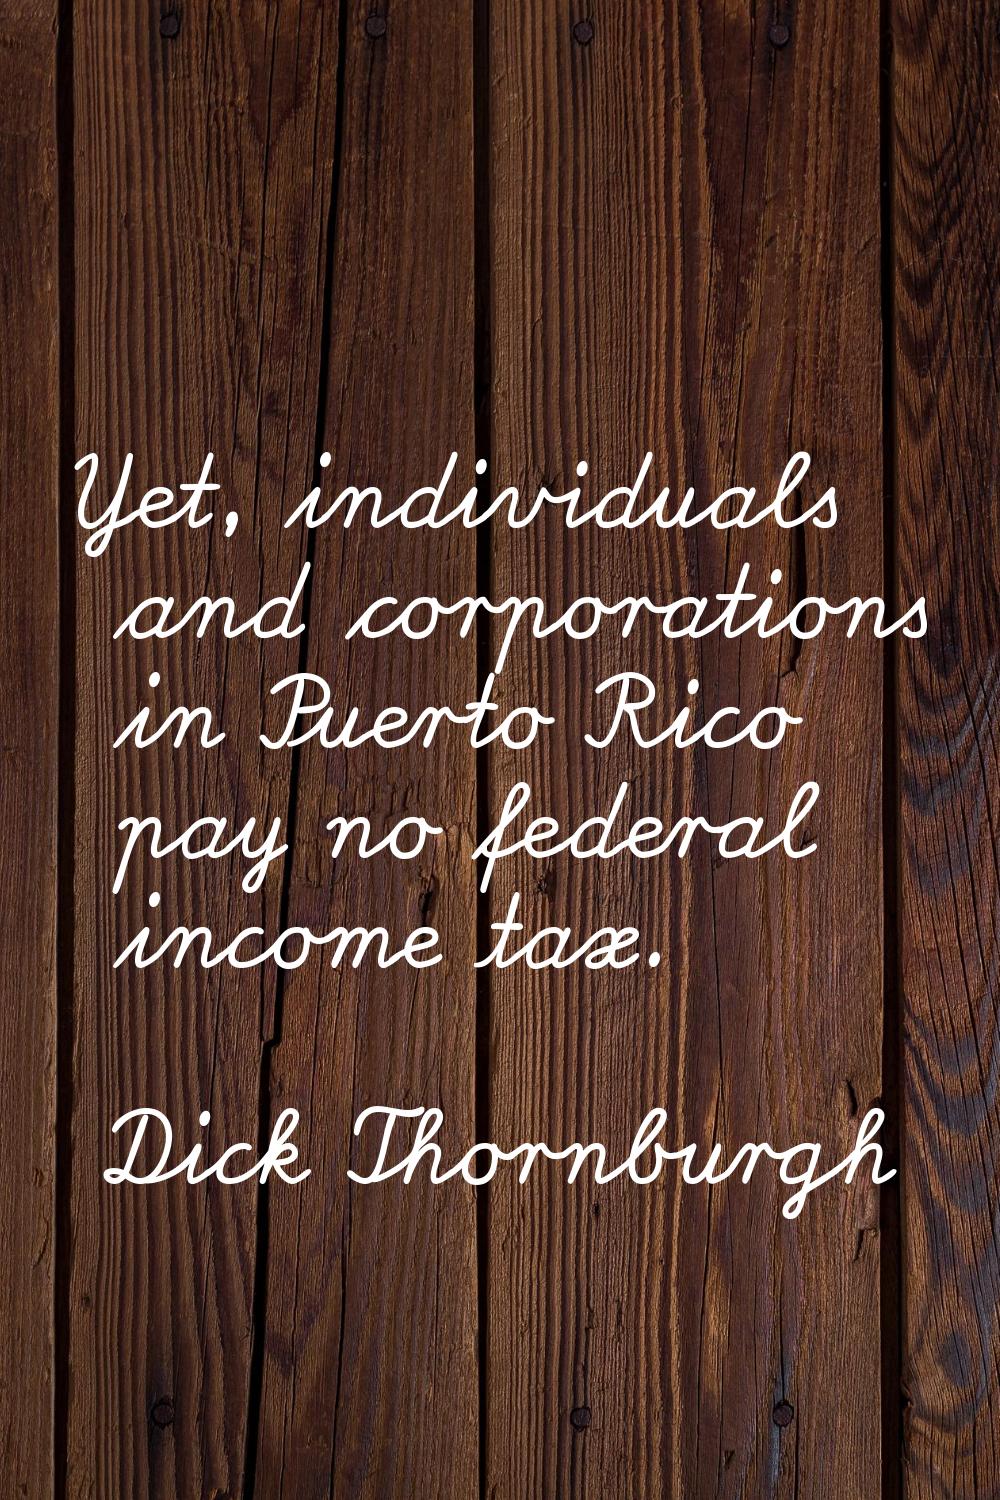 Yet, individuals and corporations in Puerto Rico pay no federal income tax.